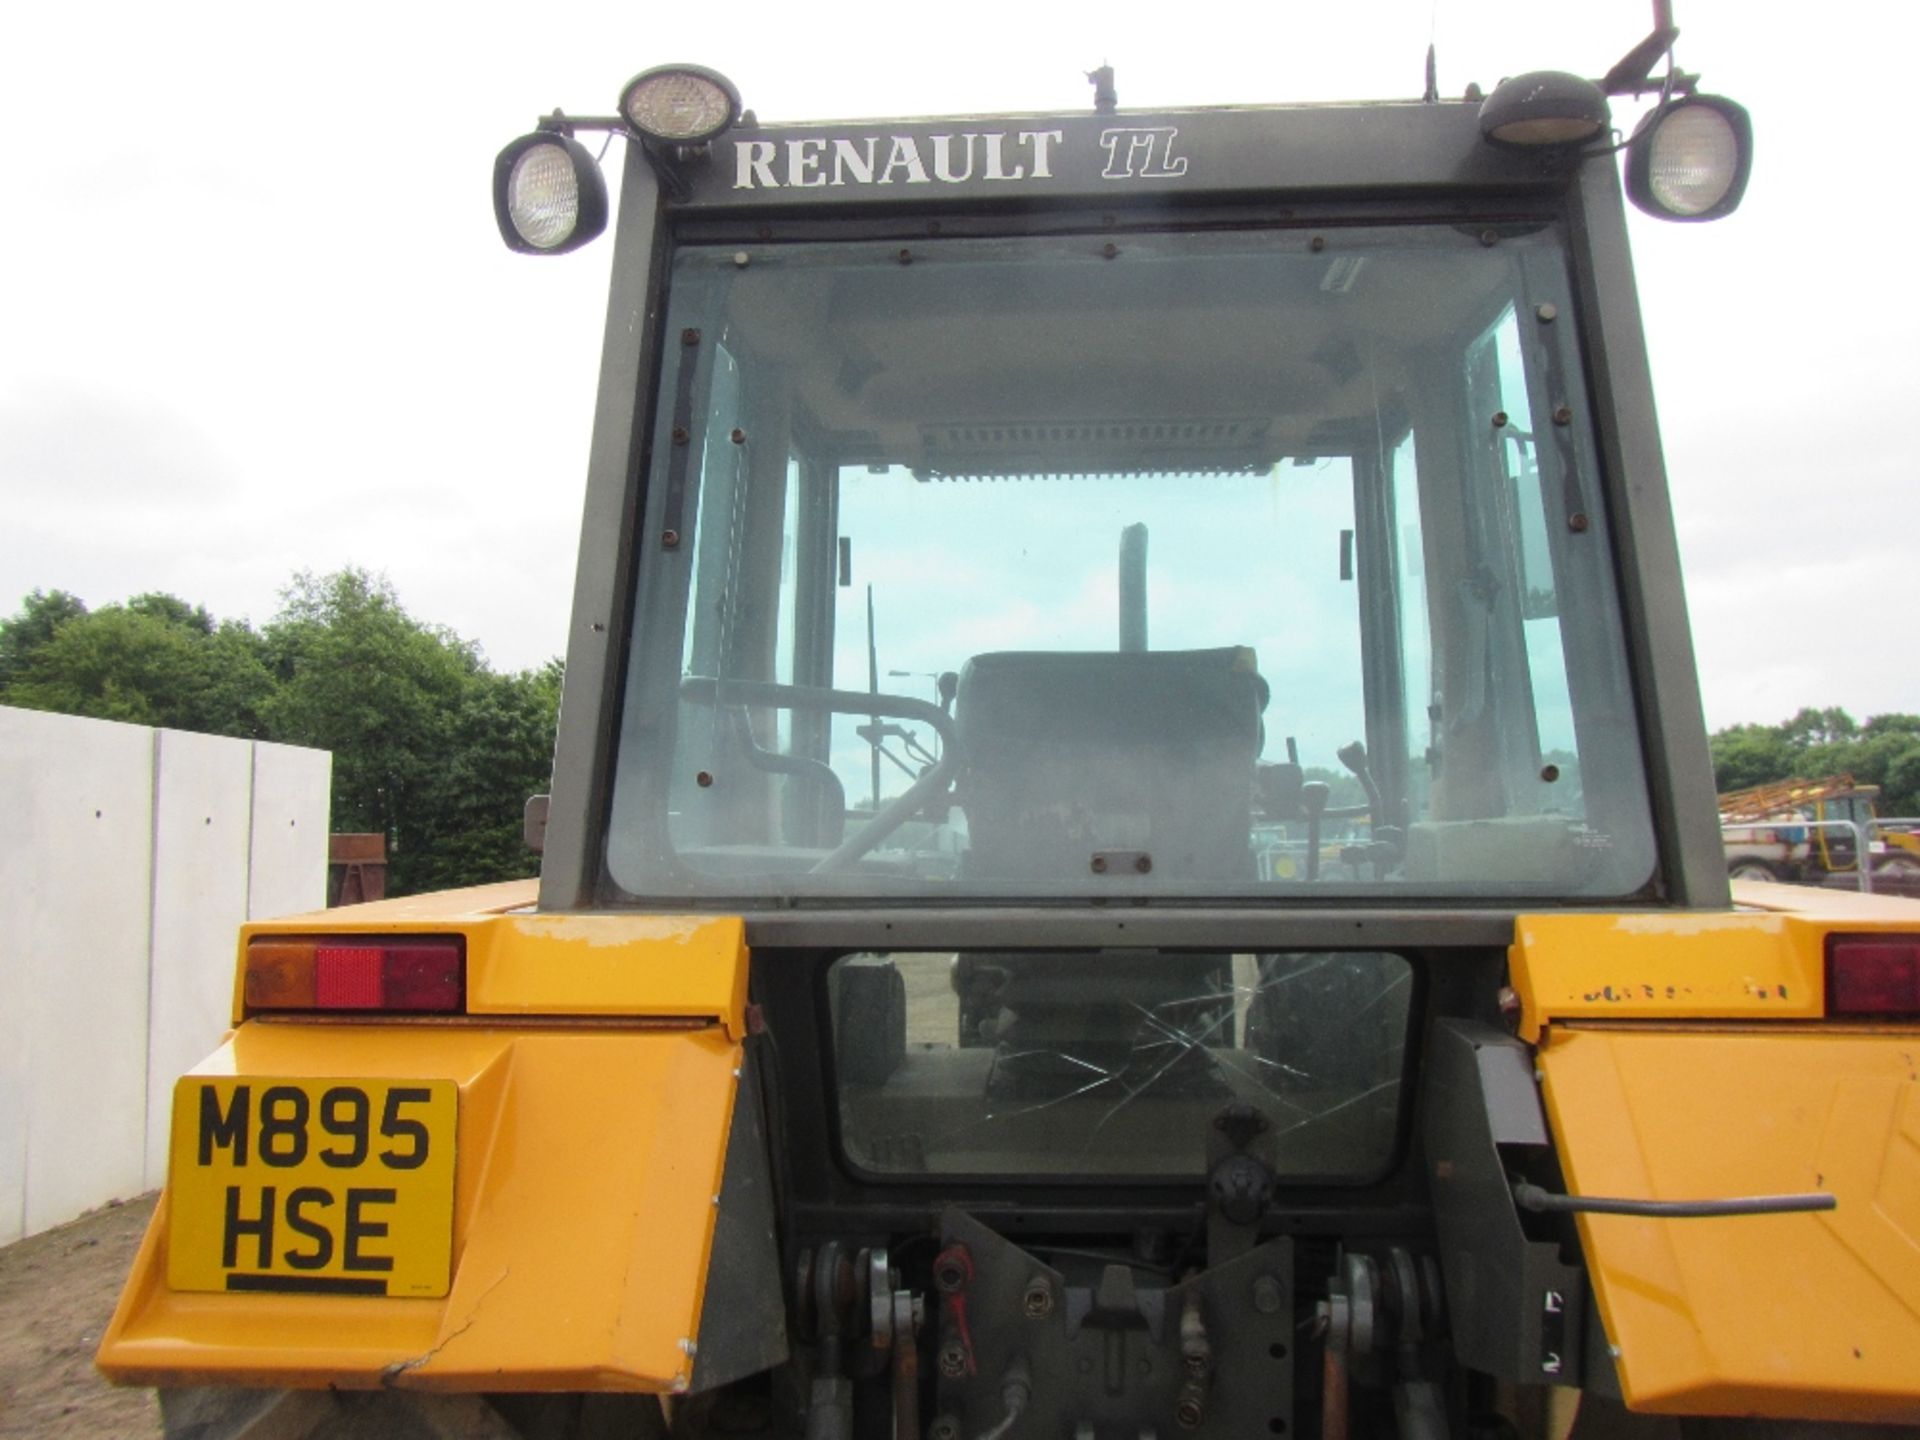 Renault 106-54 TL 4wd Tractor c/w 40k transmission, front weights Reg. No. M895 HSE - Image 9 of 18